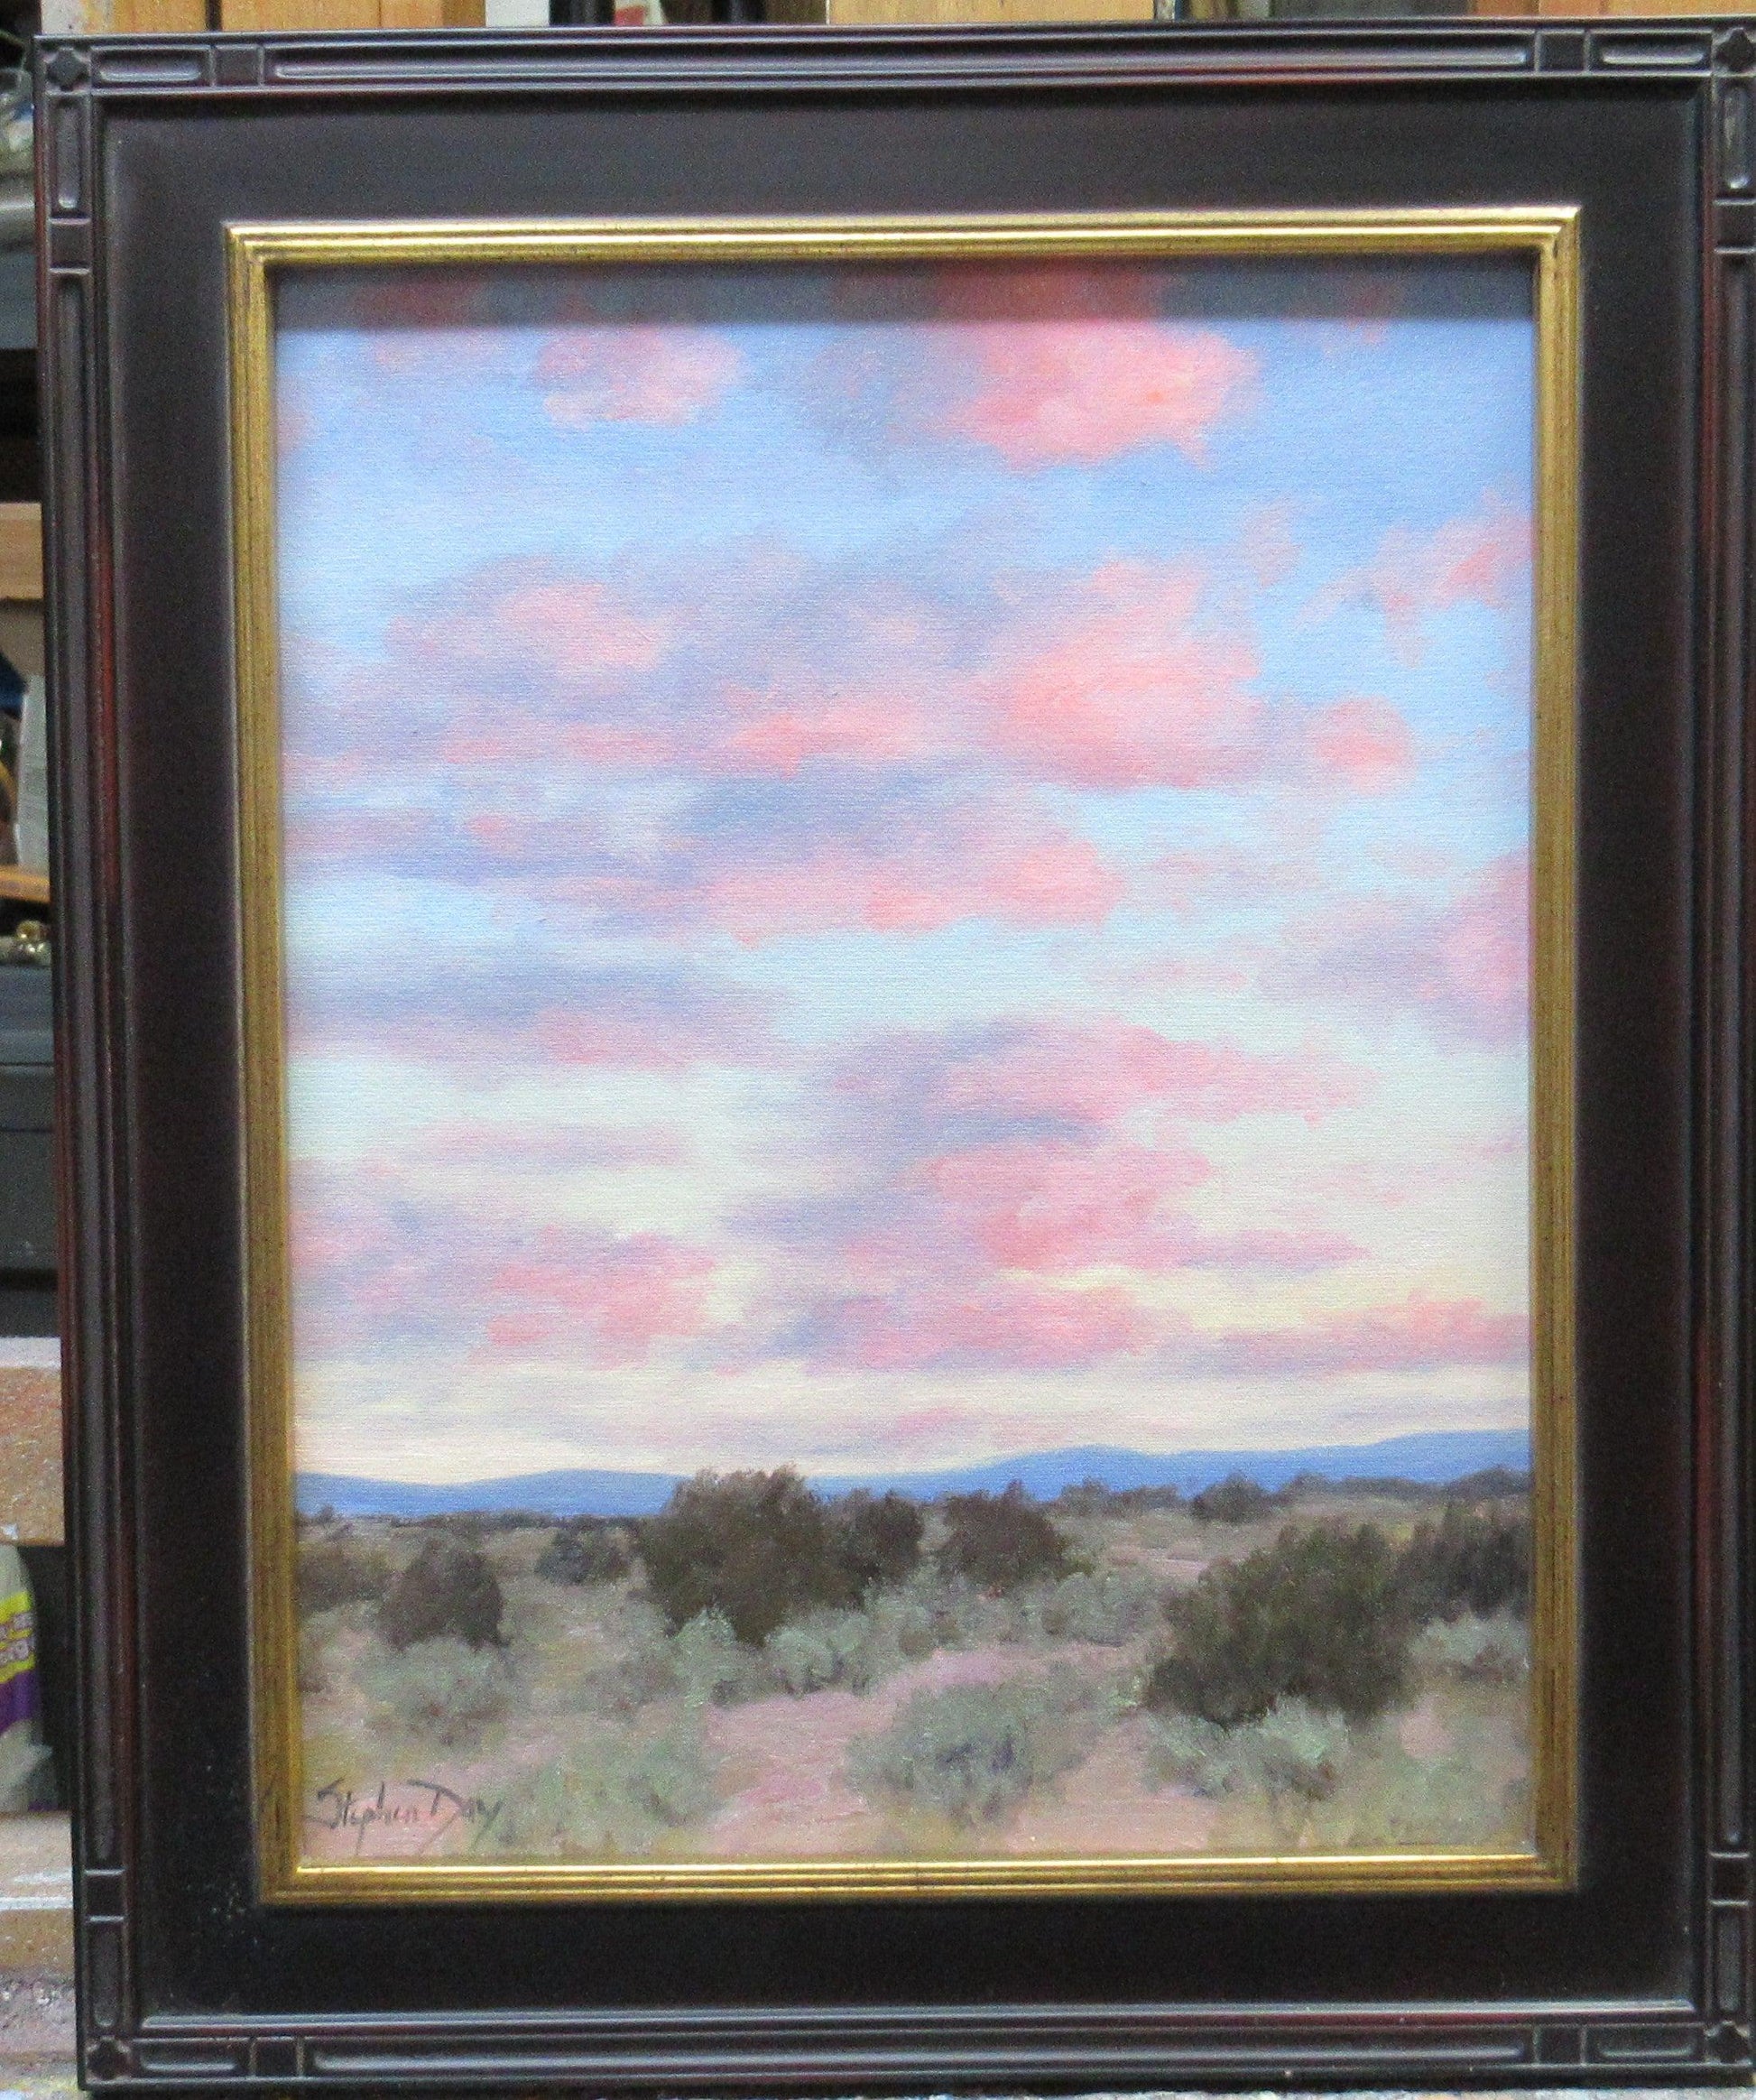 Pink Morning Sky-painting-Stephen Day-Sorrel Sky Gallery